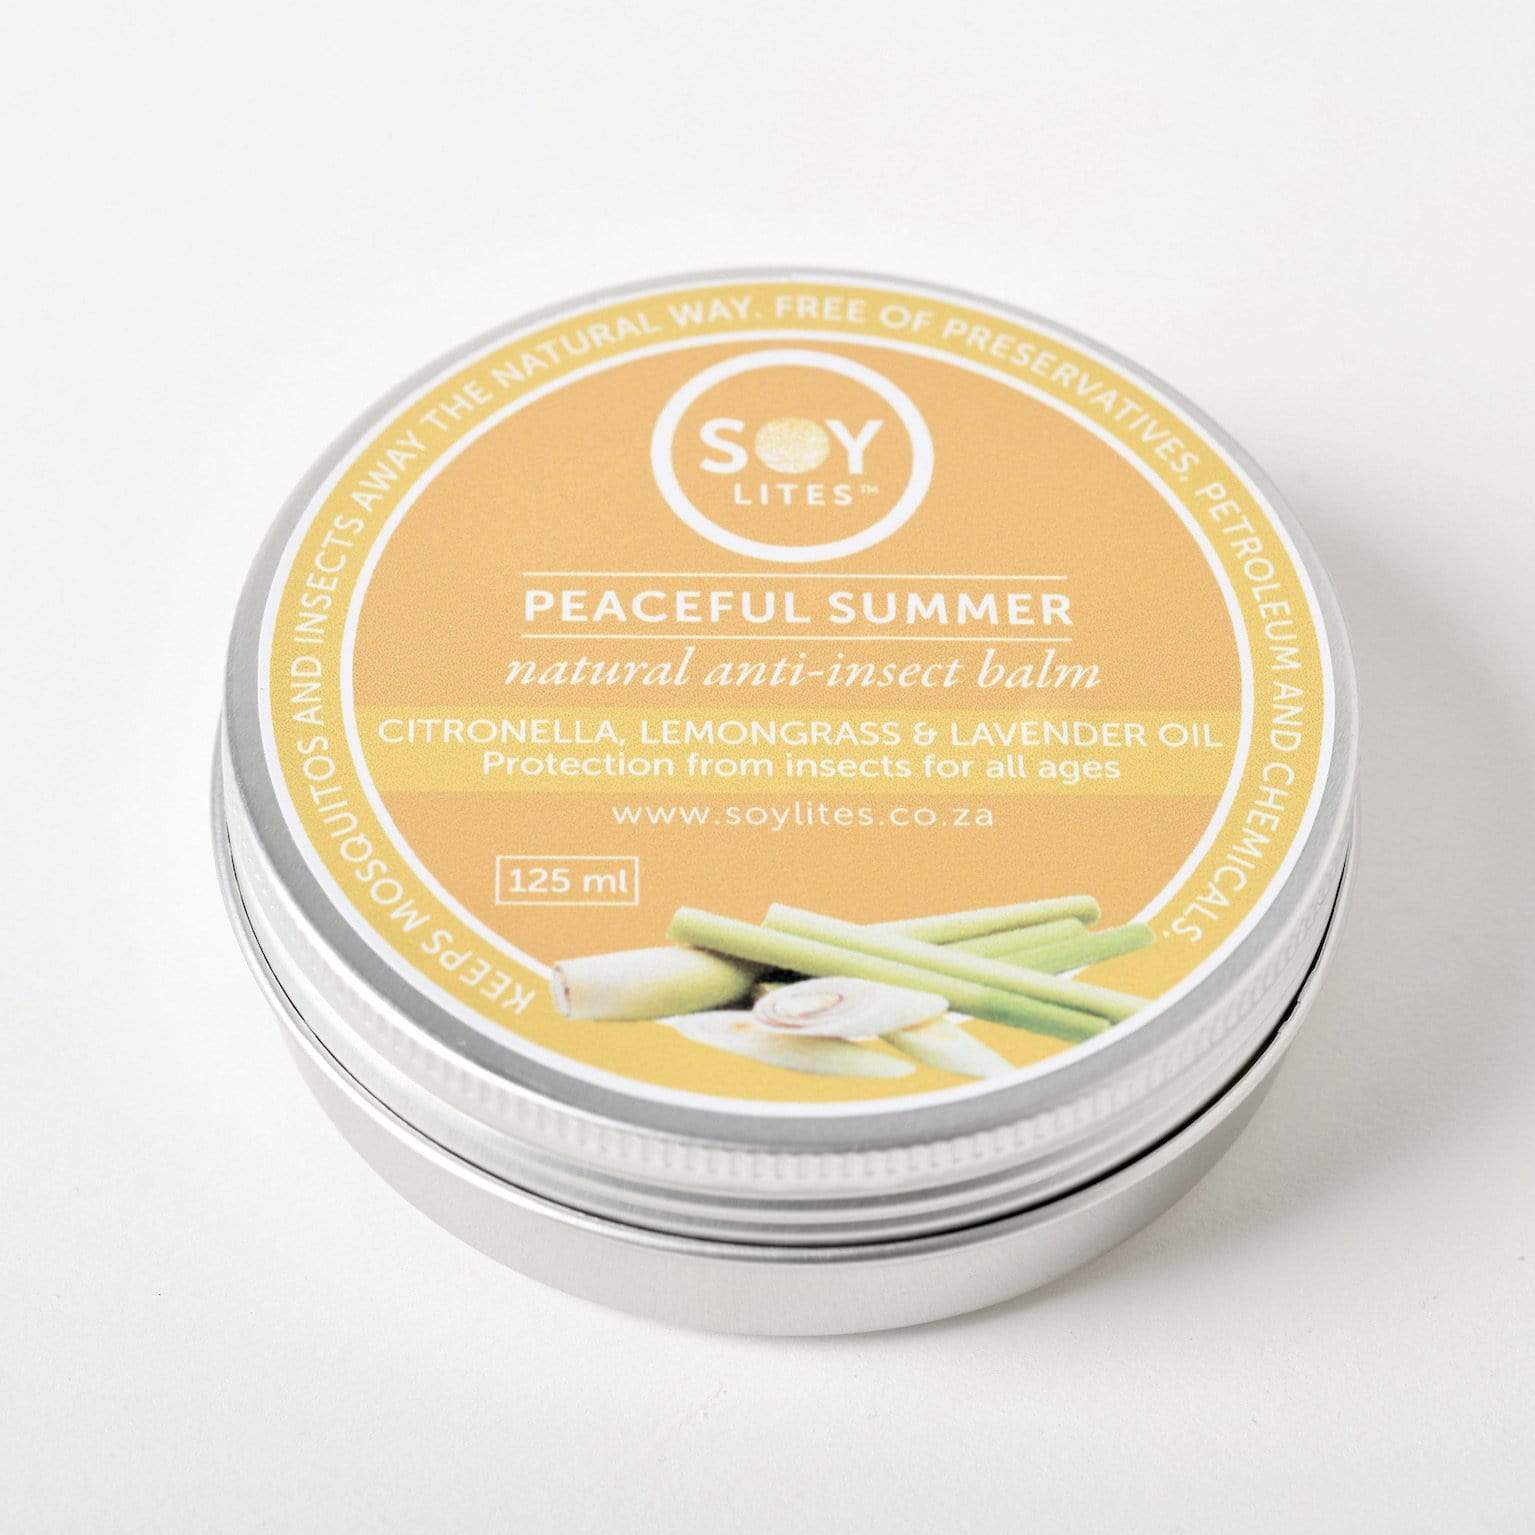 SoyLites Body Balms Peaceful Summer: Insect Repellant Balm 120ml